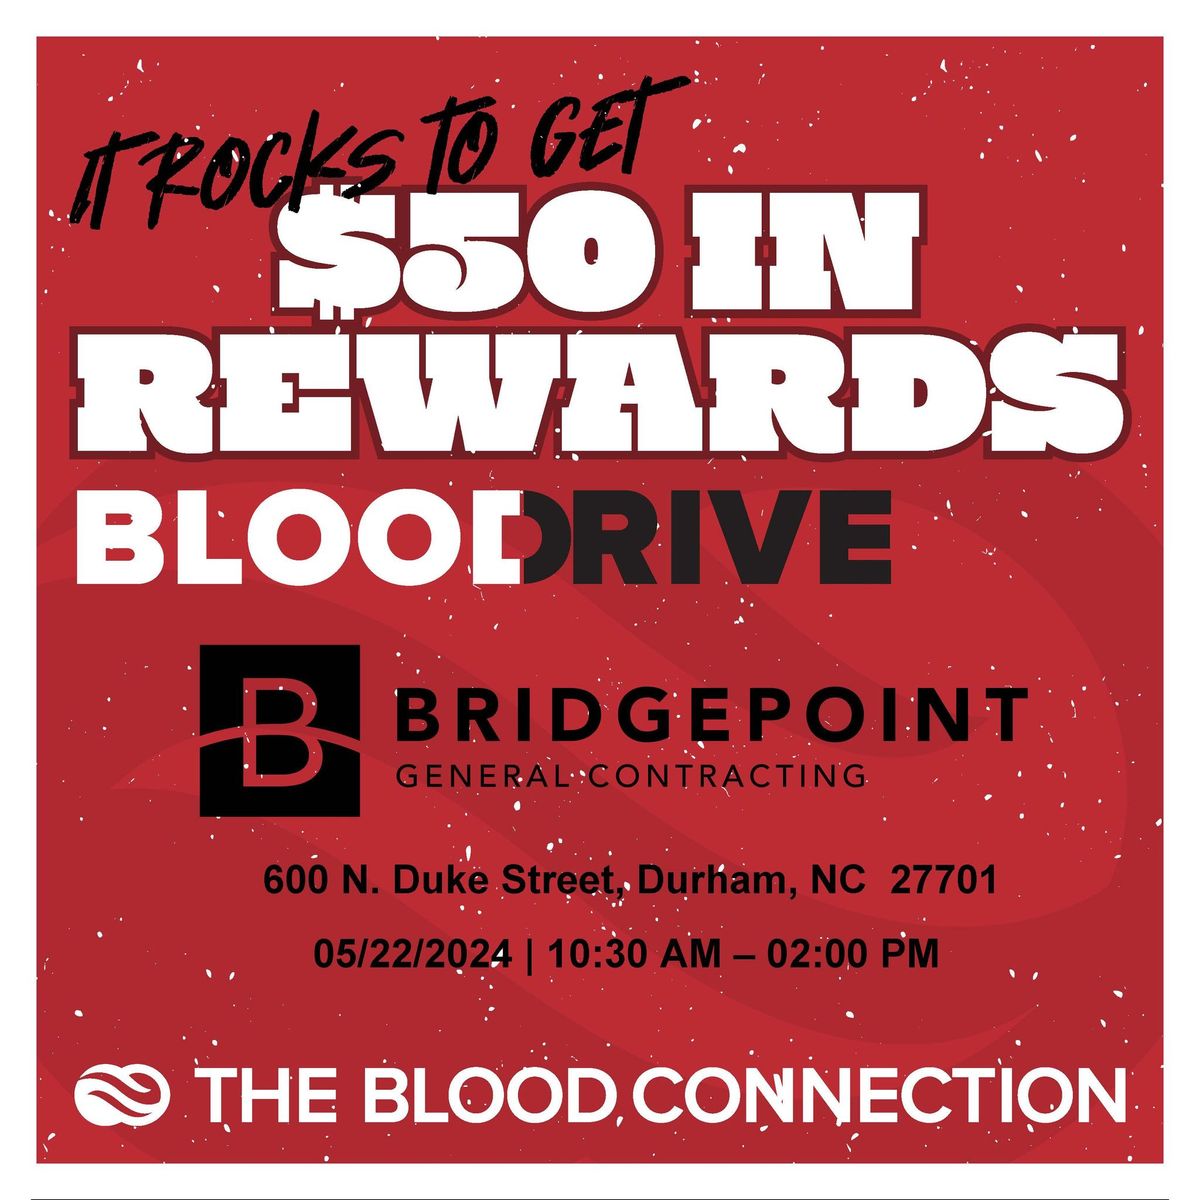 BridgePoint Blood Drive with The Blood Connection